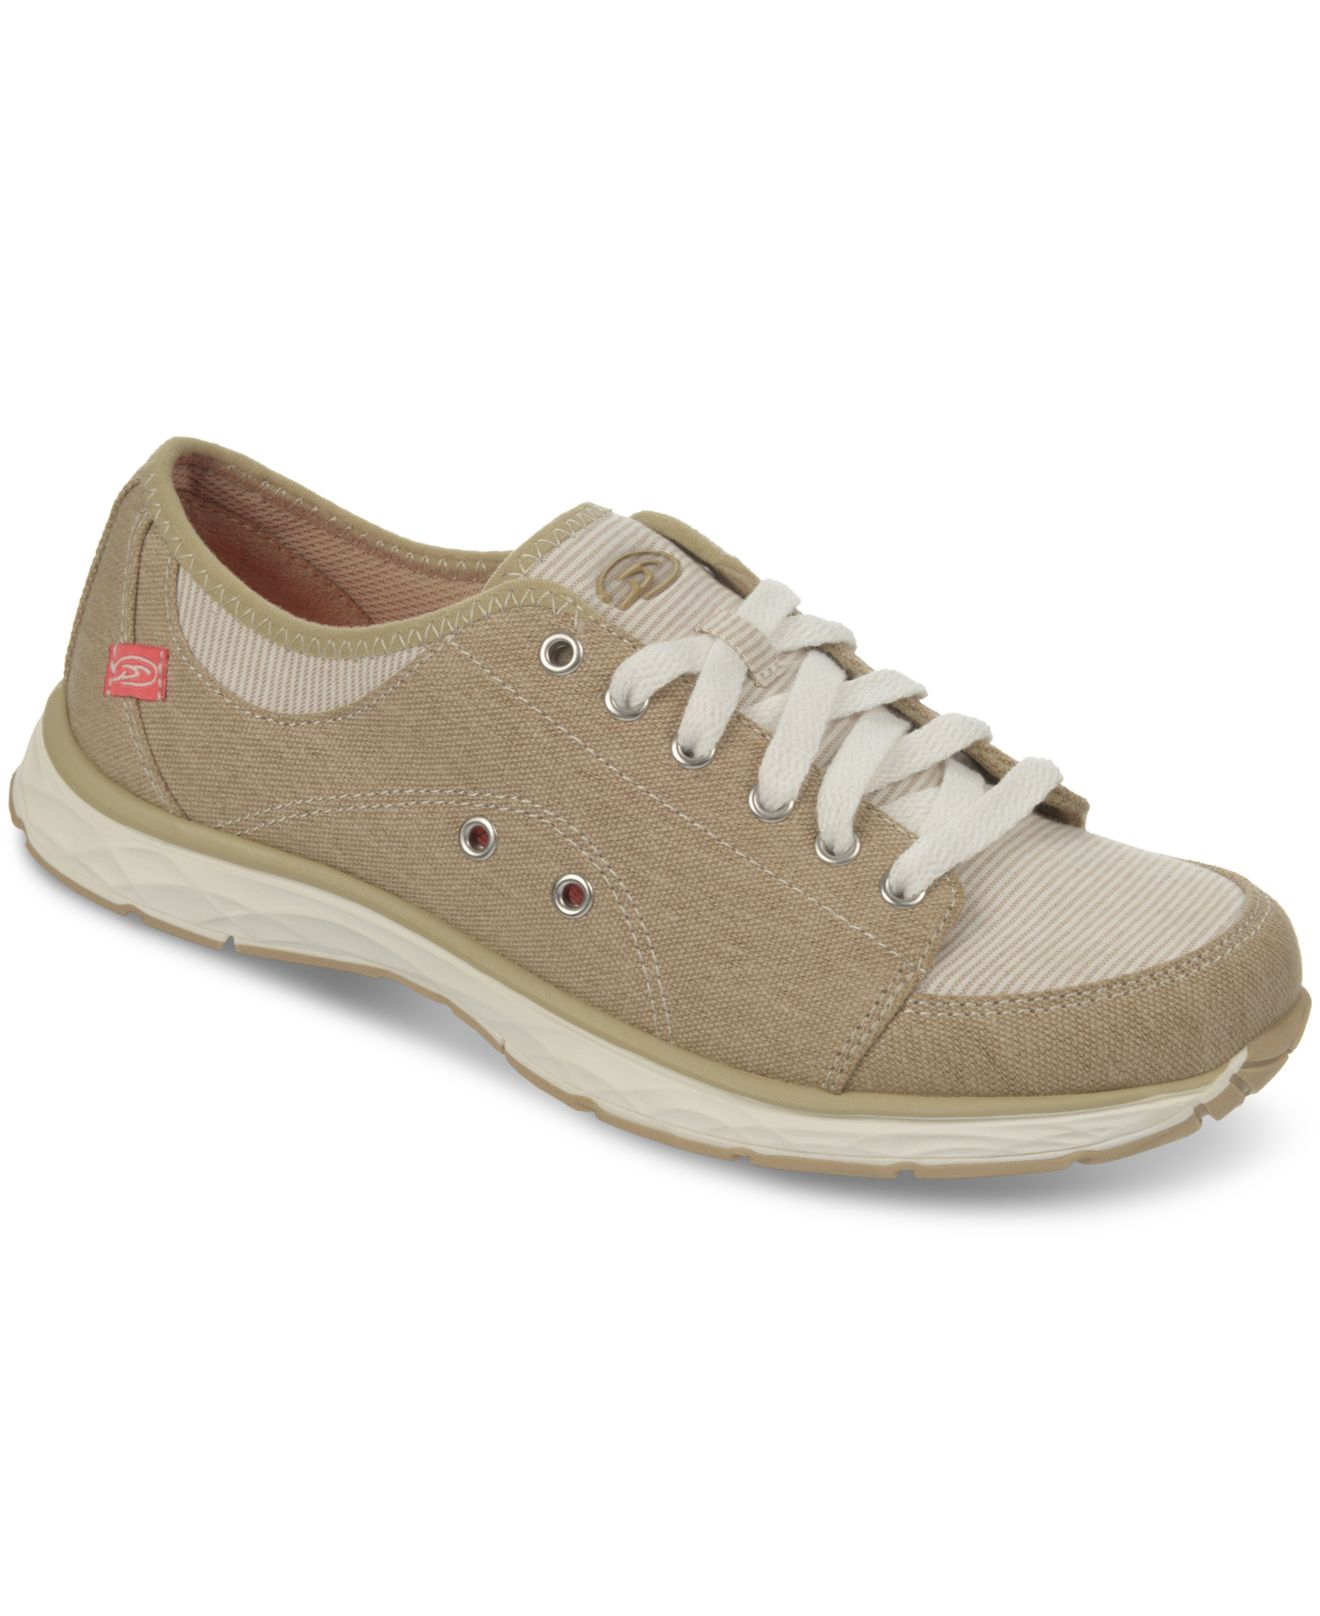 Dr. scholls Anna Sneakers in Natural | Lyst